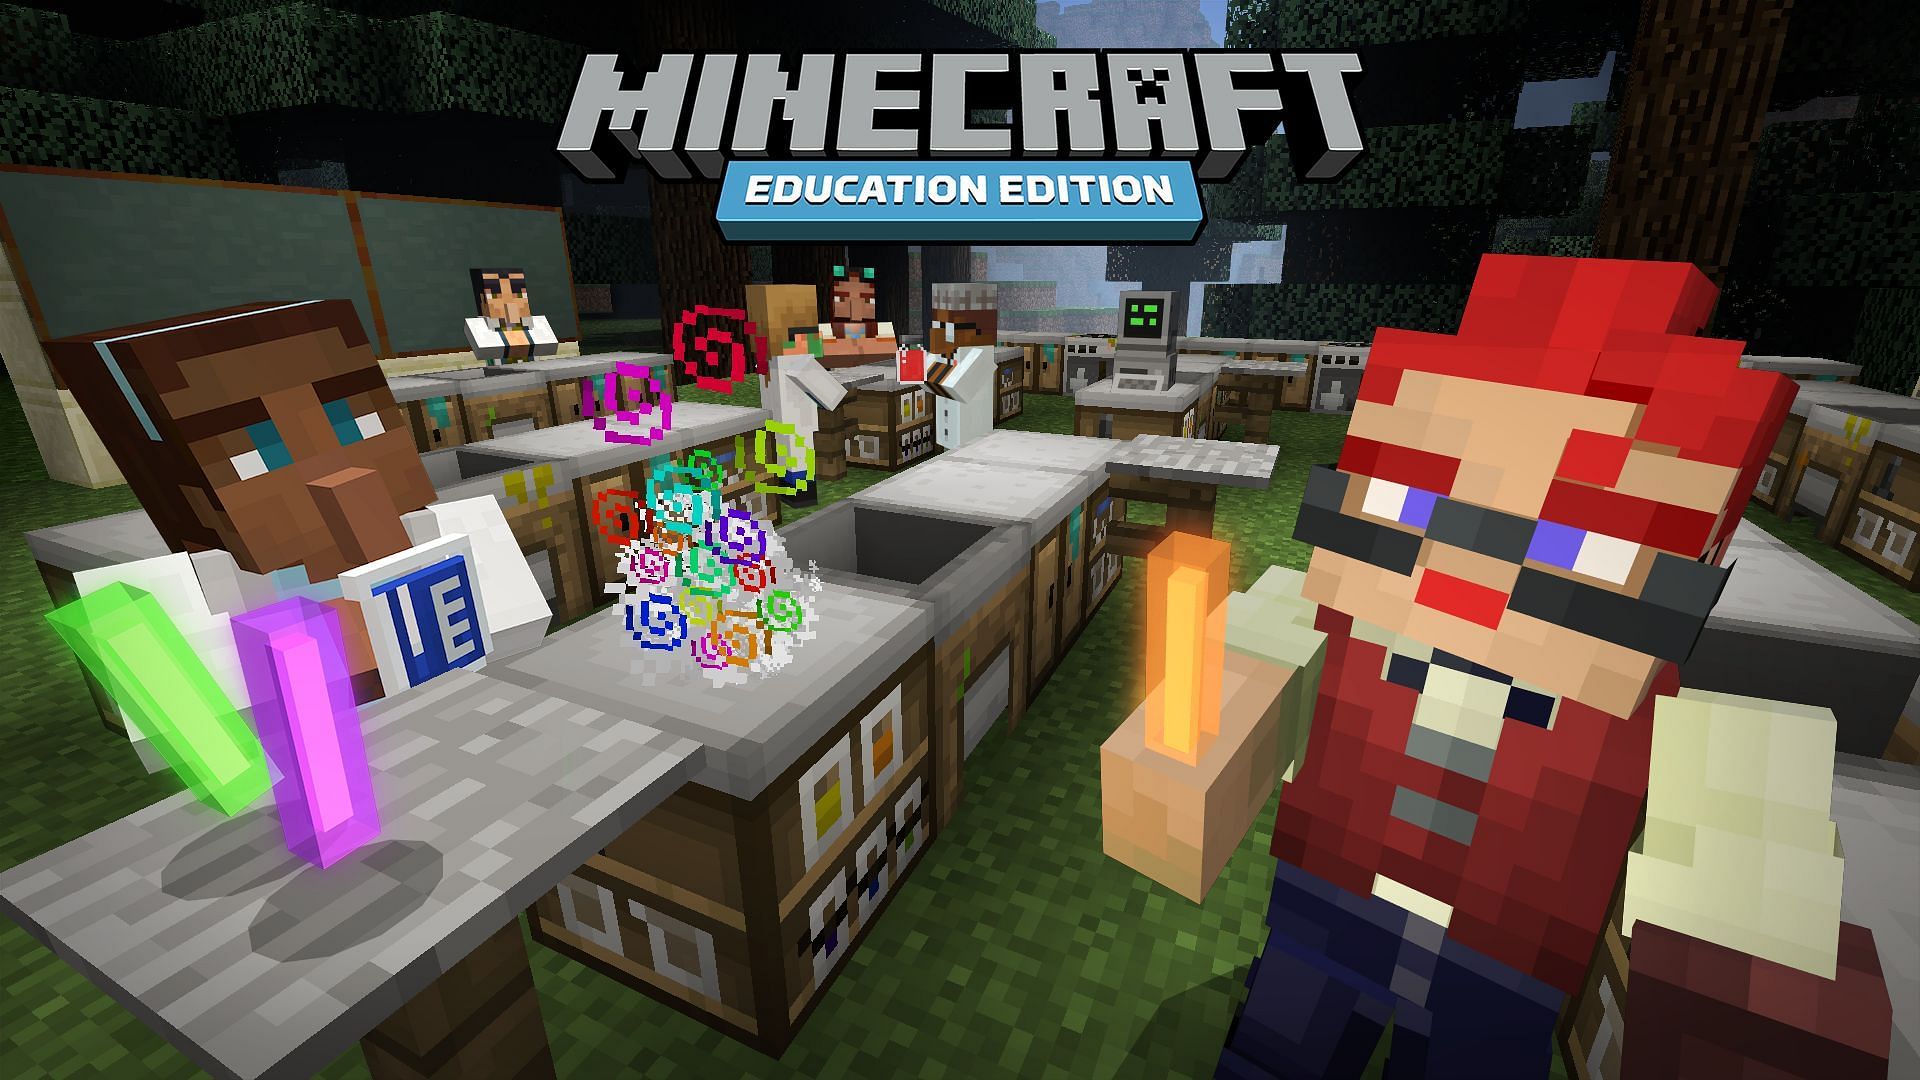 Chemistry can be used to learn a lot more in Minecraft. (Image via Mojang)